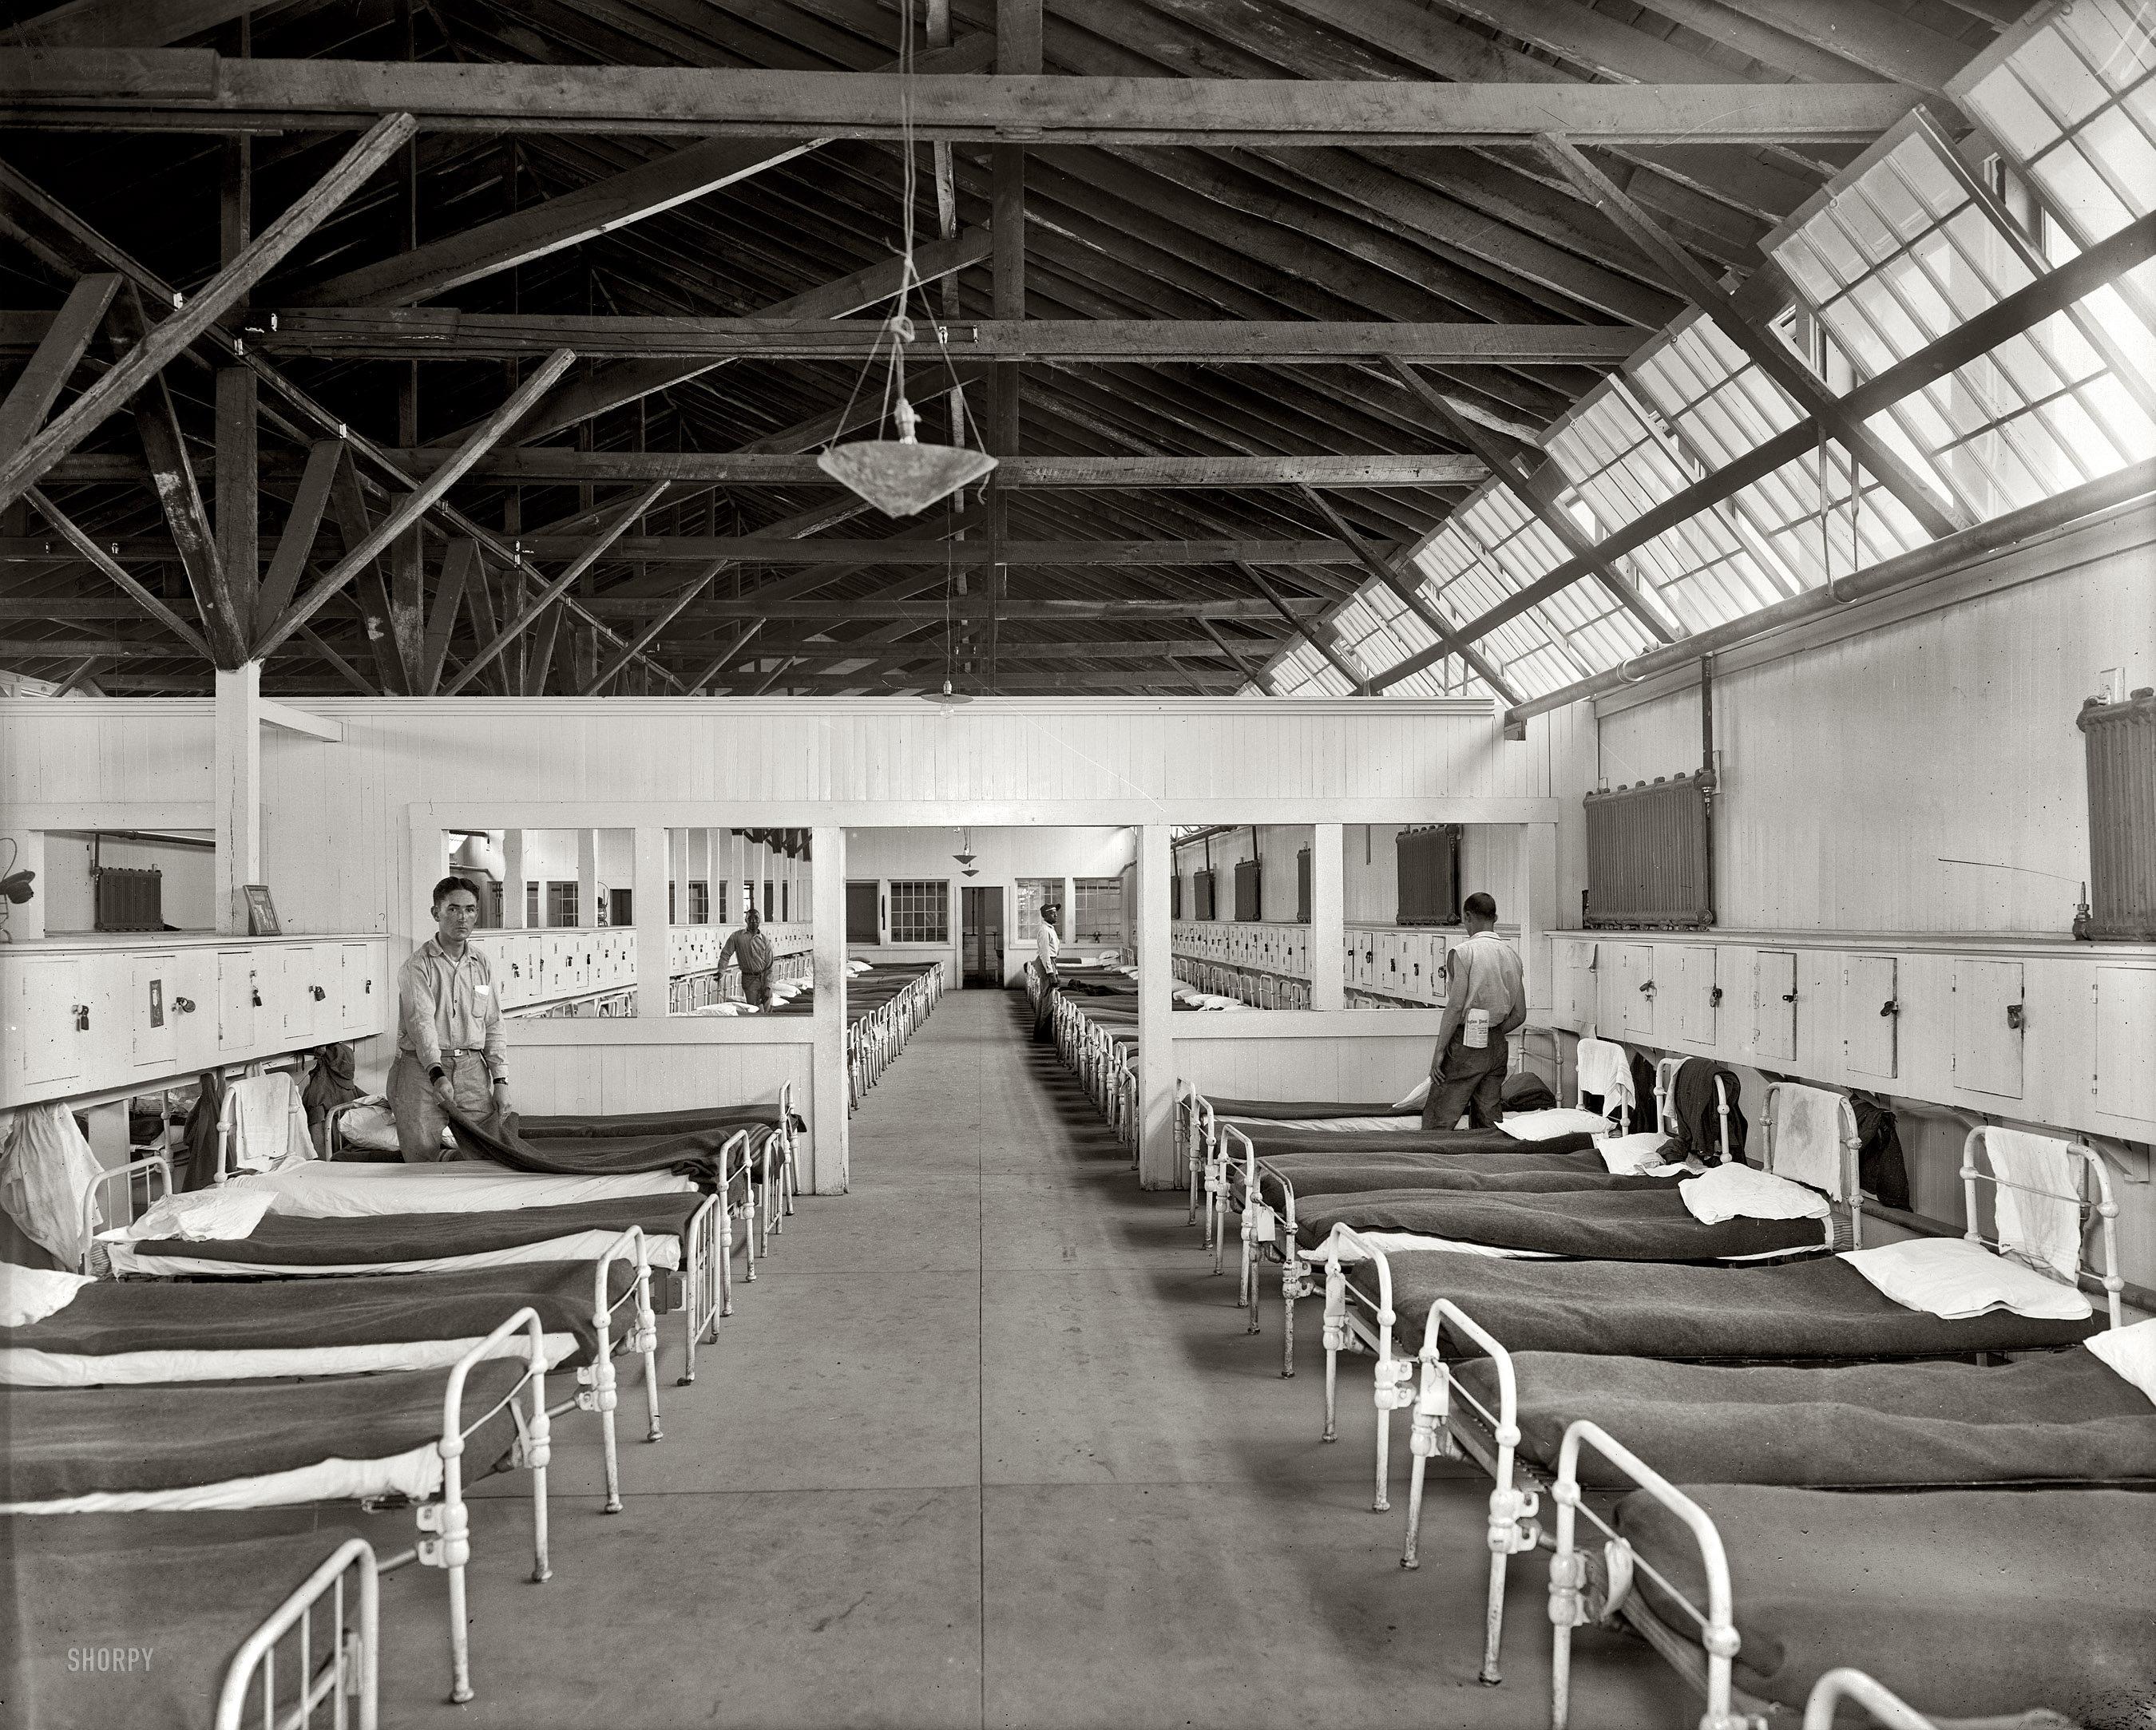 Fairfax County, Virginia, circa 1911. "Occoquan Work House, sleeping area." Part of the jail operated by the District of Columbia Department of Corrections, shown shortly after its construction. Harris & Ewing glass negative. View full size.